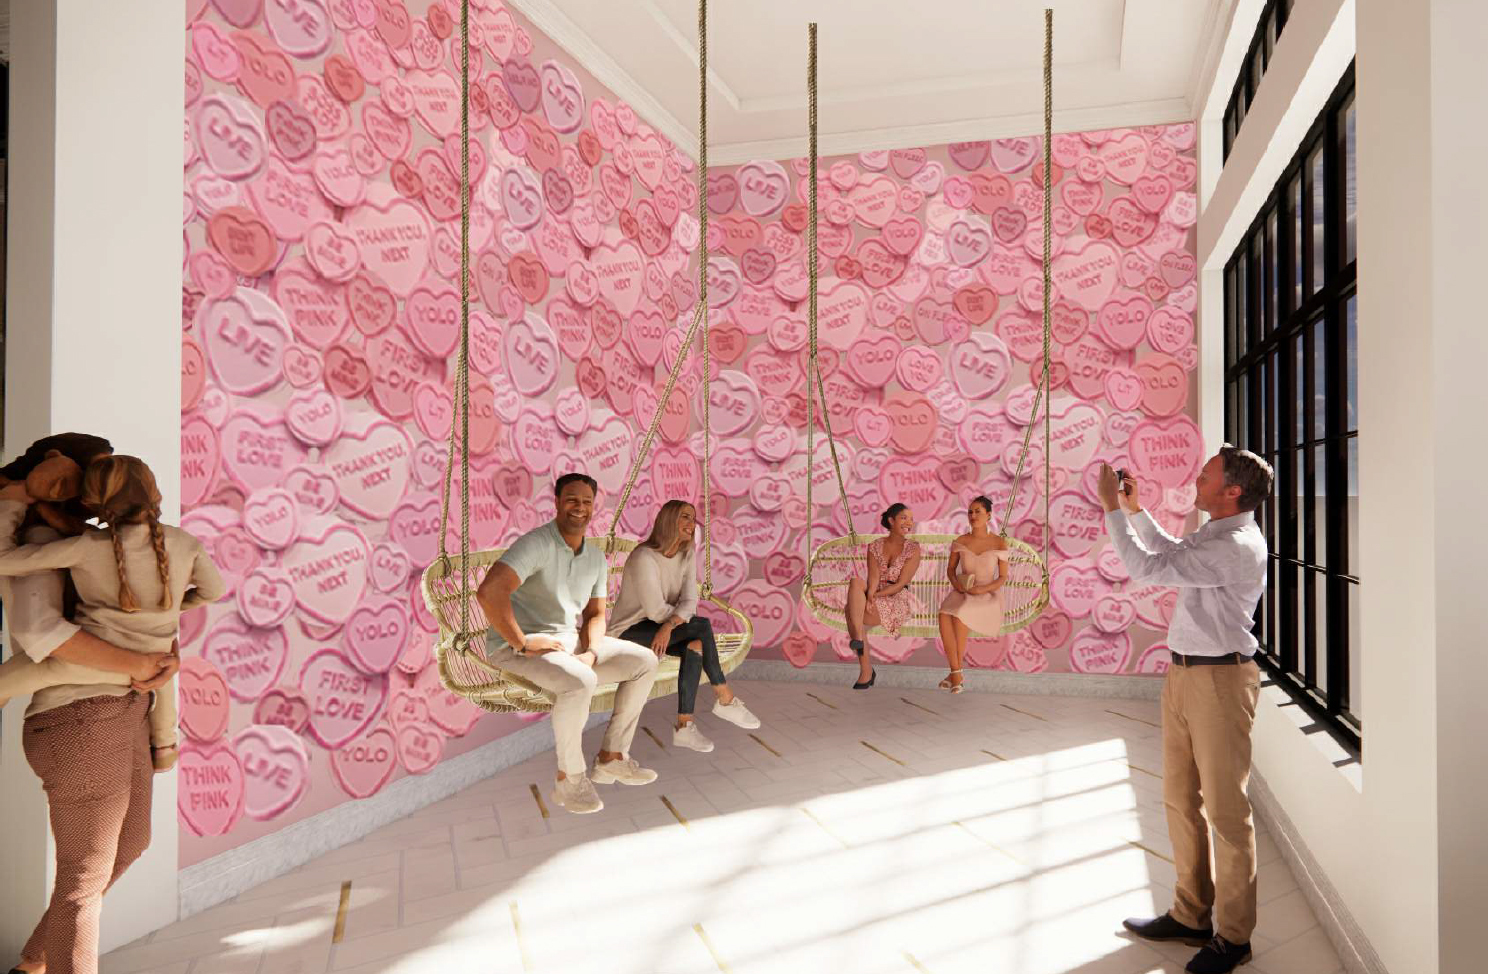 An artist's rendering of the candy heart wall inside the Sugar Factory.